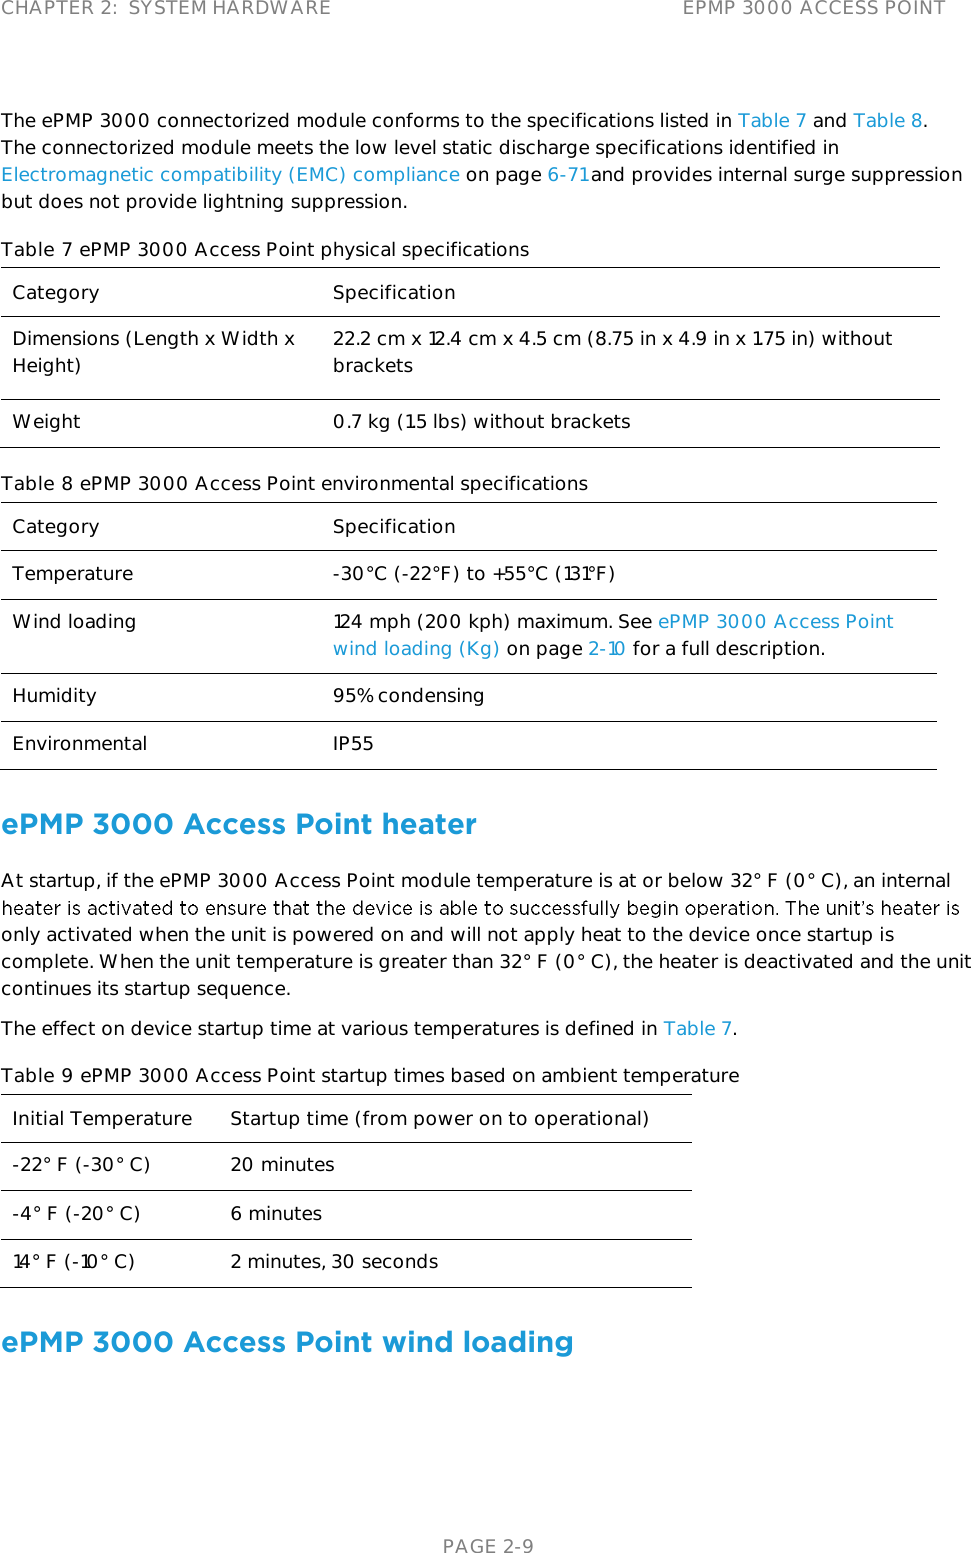 CHAPTER 2:  SYSTEM HARDWARE EPMP 3000 ACCESS POINT   PAGE 2-9 The ePMP 3000 connectorized module conforms to the specifications listed in Table 7 and Table 8. The connectorized module meets the low level static discharge specifications identified in Electromagnetic compatibility (EMC) compliance on page 6-71 and provides internal surge suppression but does not provide lightning suppression. Table 7 ePMP 3000 Access Point physical specifications Category Specification Dimensions (Length x Width x Height) 22.2 cm x 12.4 cm x 4.5 cm (8.75 in x 4.9 in x 1.75 in) without brackets  Weight  0.7 kg (1.5 lbs) without brackets Table 8 ePMP 3000 Access Point environmental specifications Category Specification Temperature  -30°C (-22°F) to +55°C (131°F) Wind loading  124 mph (200 kph) maximum. See ePMP 3000 Access Point wind loading (Kg) on page 2-10 for a full description. Humidity  95% condensing Environmental IP55 ePMP 3000 Access Point heater At startup, if the ePMP 3000 Access Point module temperature is at or below 32° F (0° C), an internal only activated when the unit is powered on and will not apply heat to the device once startup is complete. When the unit temperature is greater than 32° F (0° C), the heater is deactivated and the unit continues its startup sequence. The effect on device startup time at various temperatures is defined in Table 7. Table 9 ePMP 3000 Access Point startup times based on ambient temperature Initial Temperature Startup time (from power on to operational) -22° F (-30° C) 20 minutes -4° F (-20° C) 6 minutes 14° F (-10° C) 2 minutes, 30 seconds ePMP 3000 Access Point wind loading 